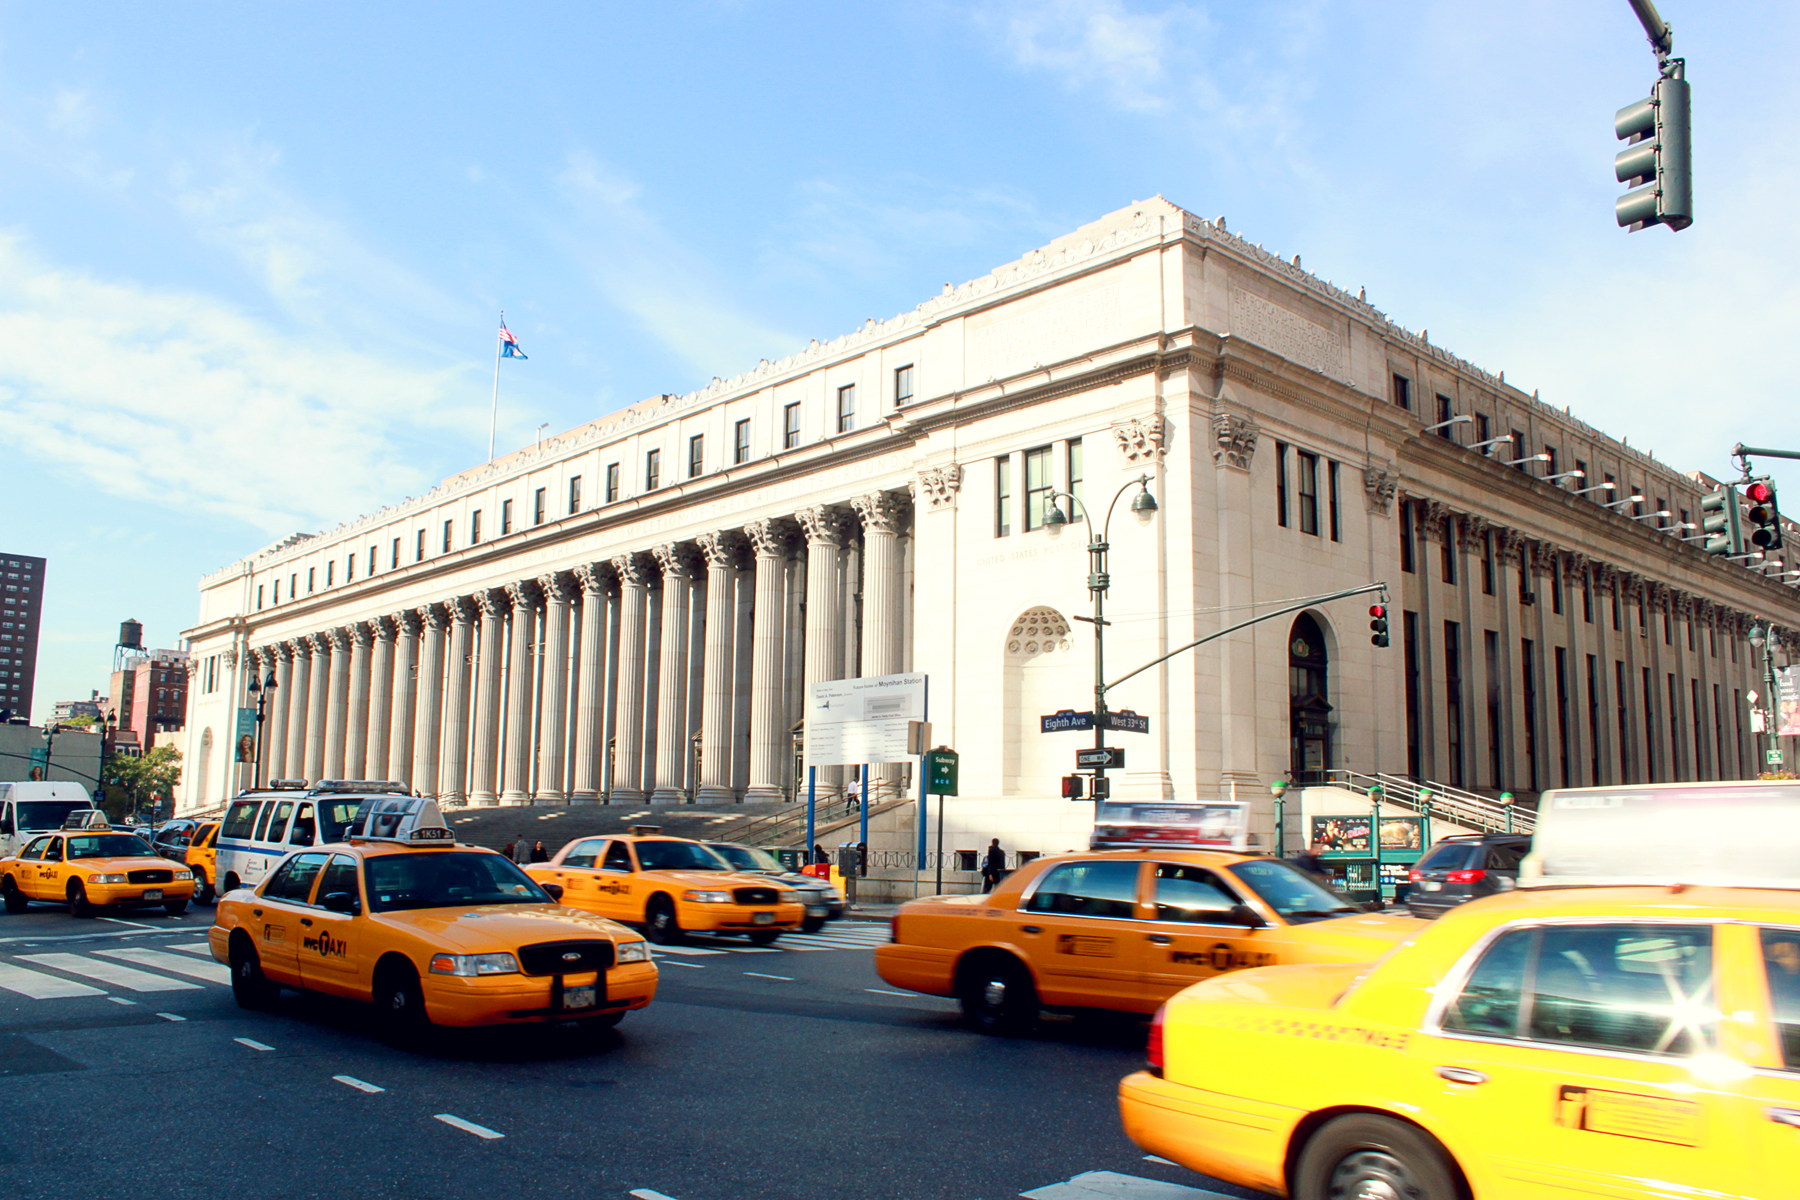 James A. Farley Post Office across the street form Penn Station will be transformed into a train hall housing Amtrak and the LIRR. Photo credit: Juan Miguel Lago